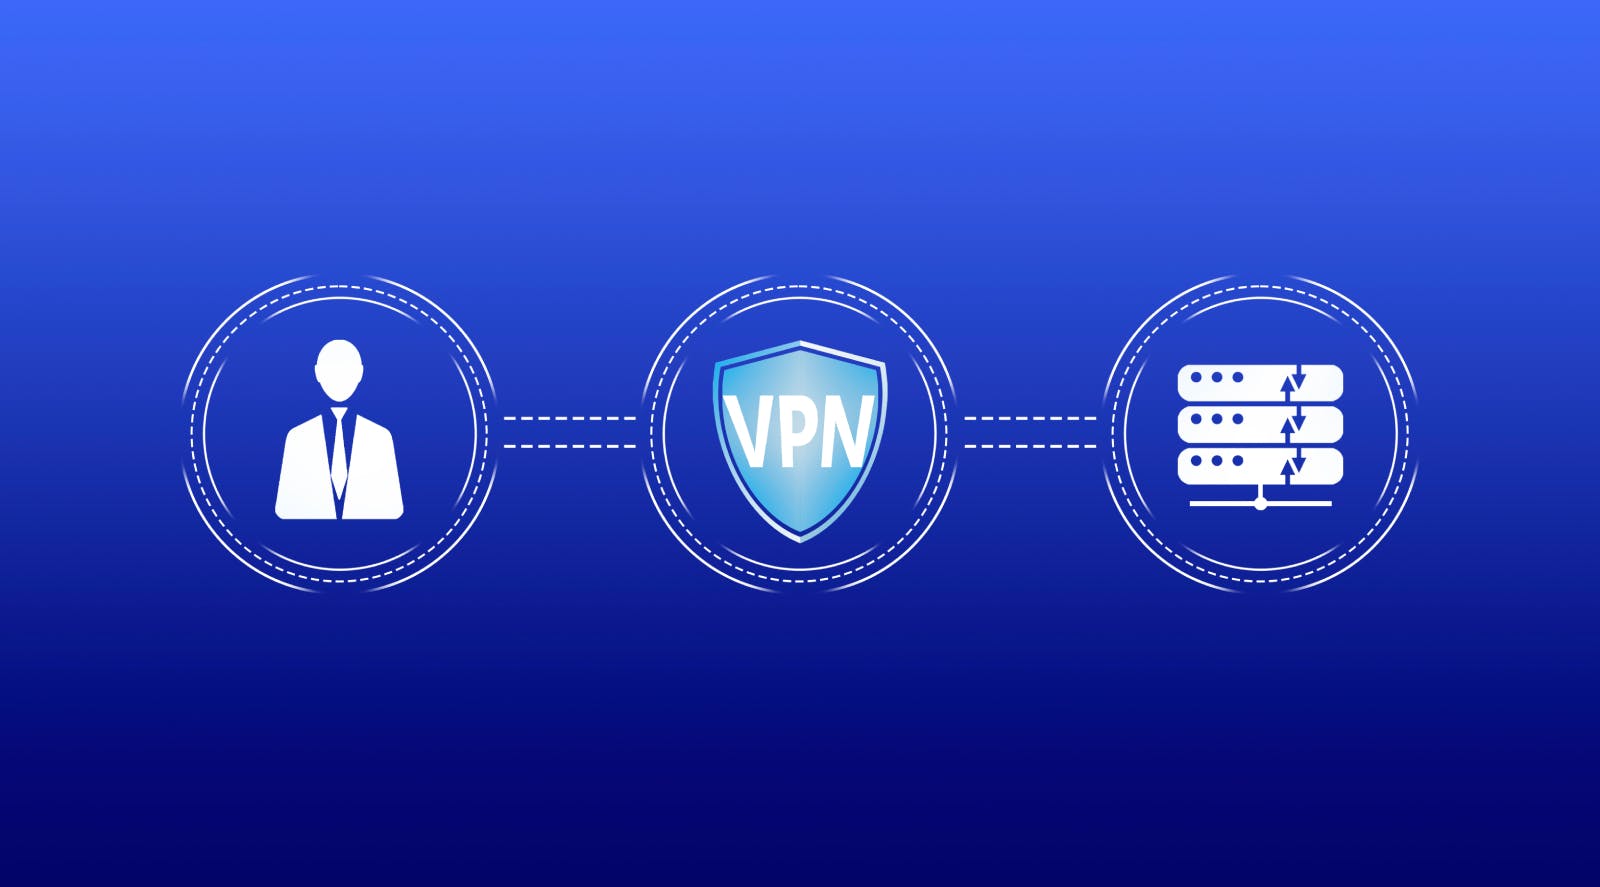 What Is a VPN Concentrator? How Does It Work?